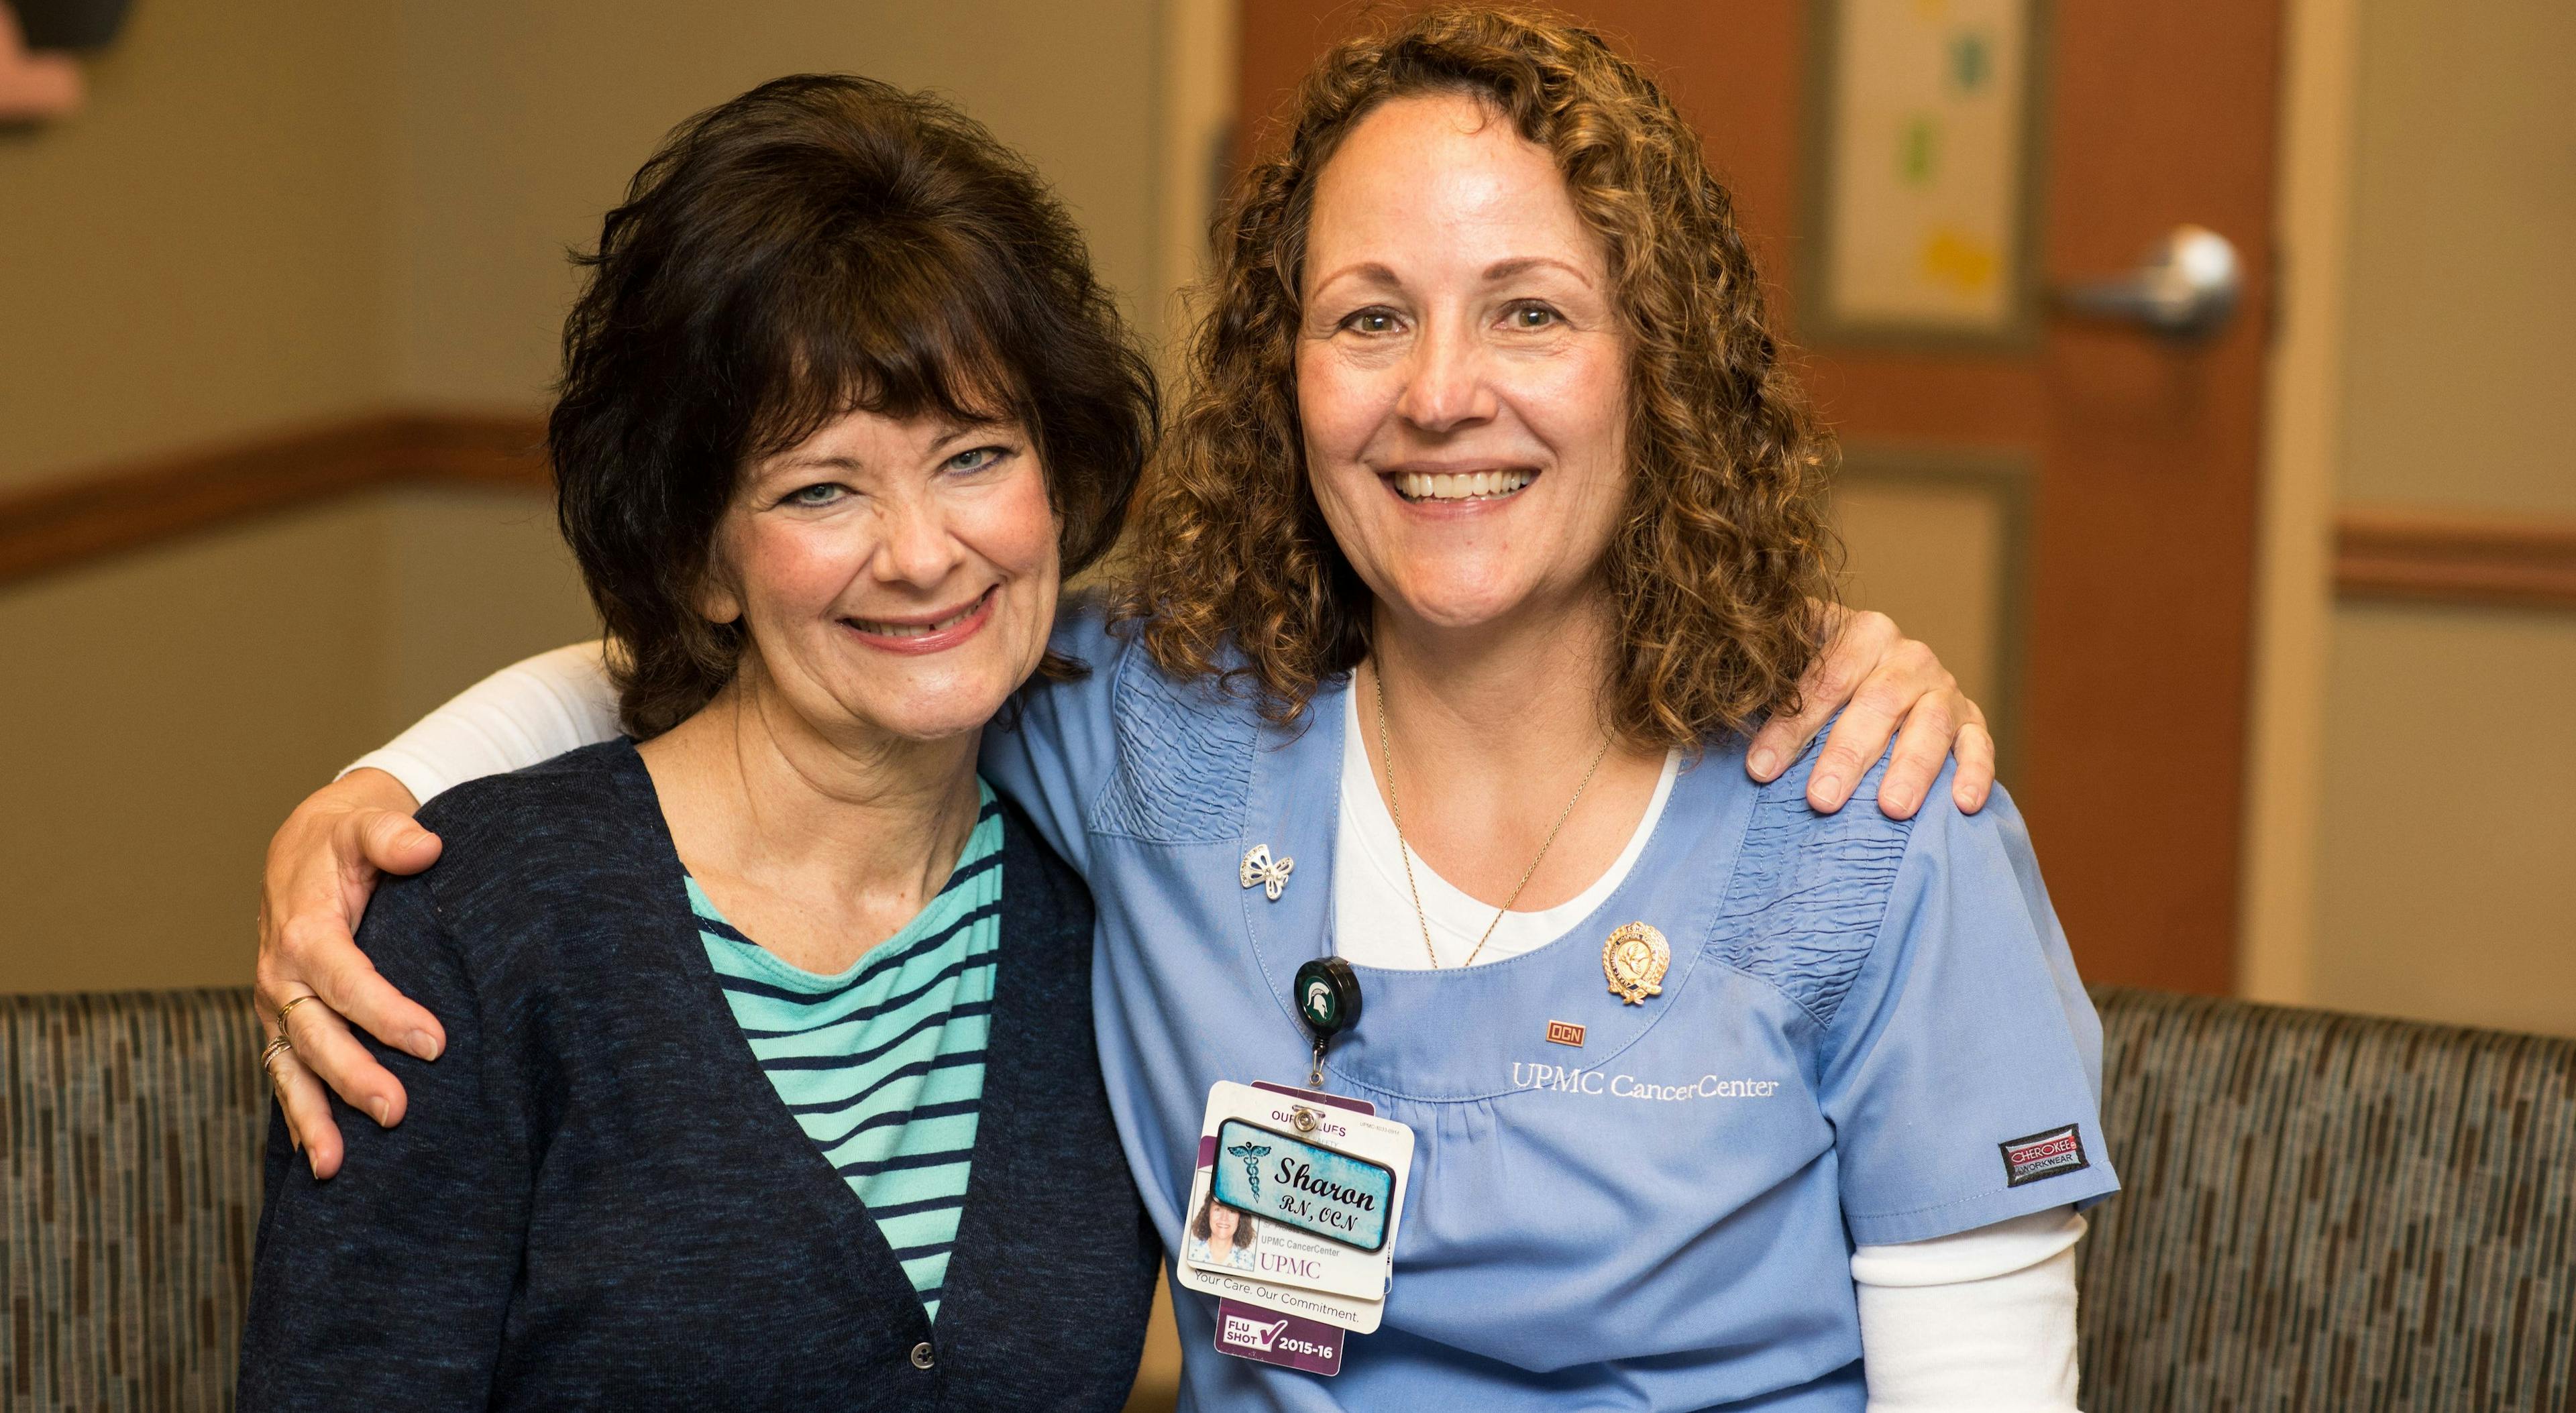  Diane Makrinos and Sharon O’Connell Welch, RN, OCN PHOTO BY KATHRYN HYSLOP